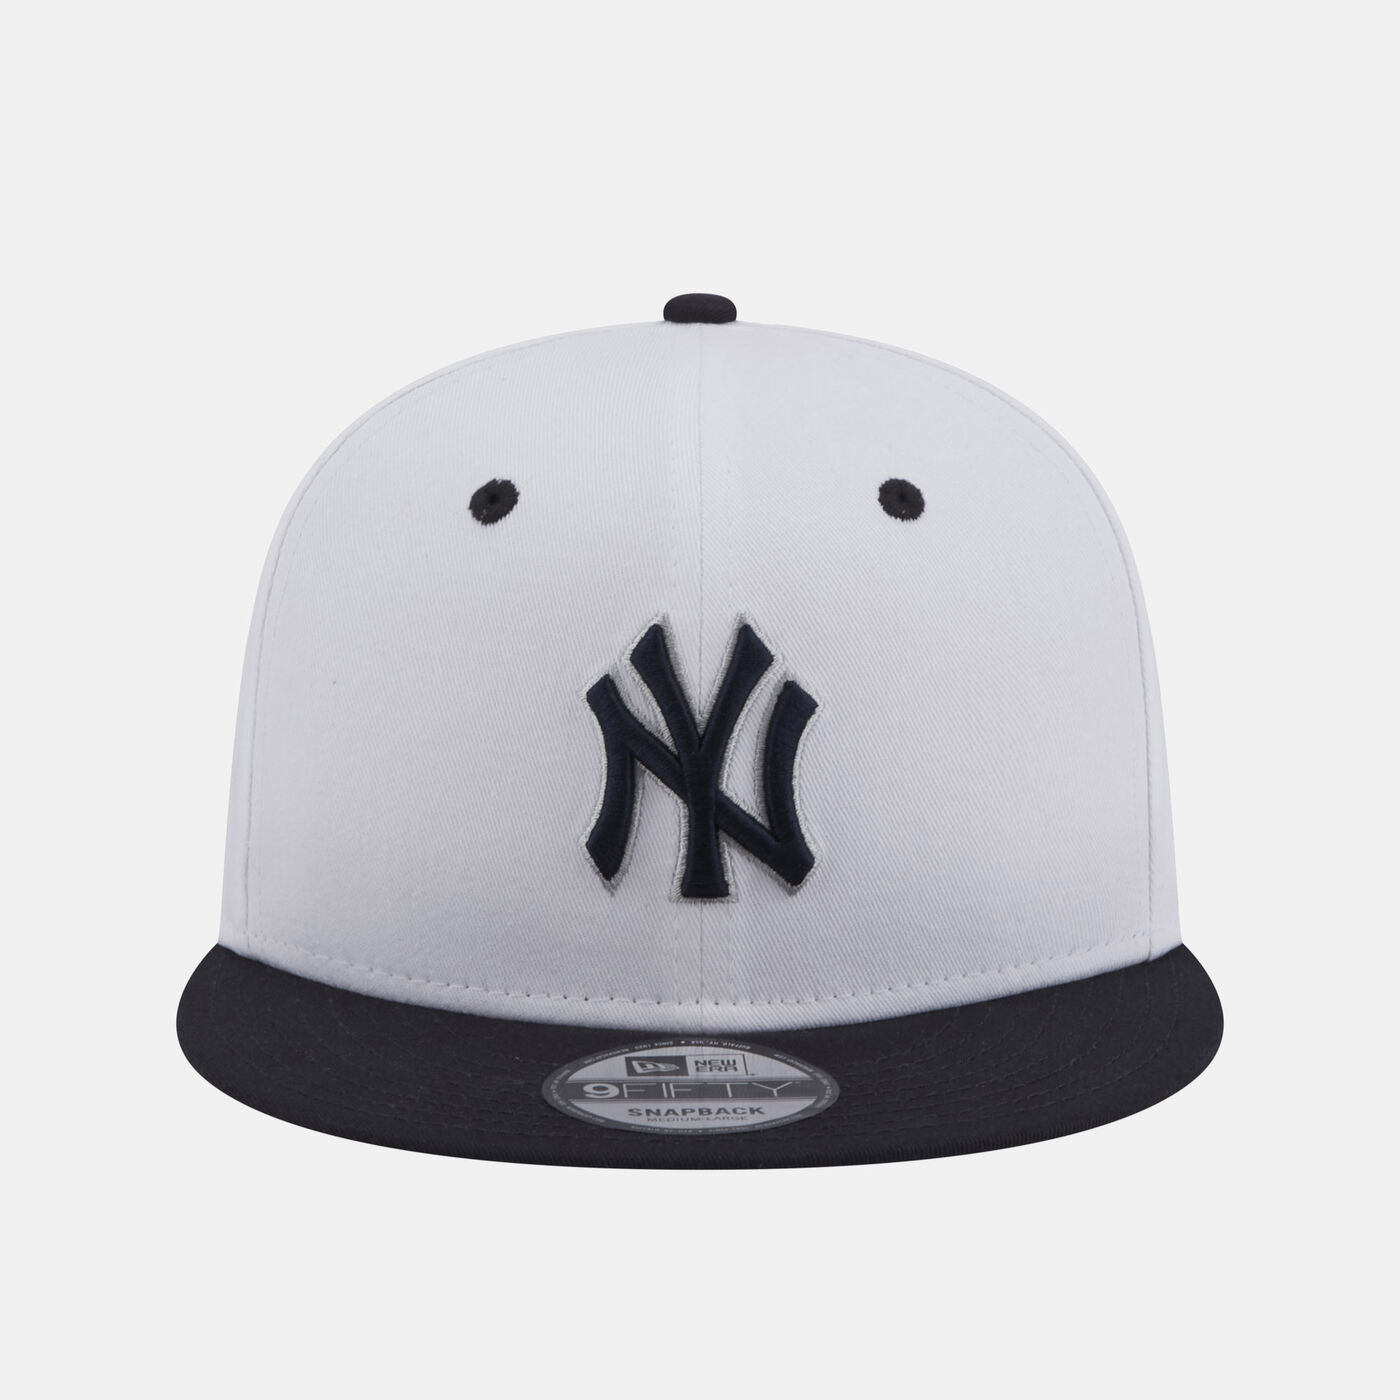 Men's New York Yankees Crown Patch 9FIFTY Cap